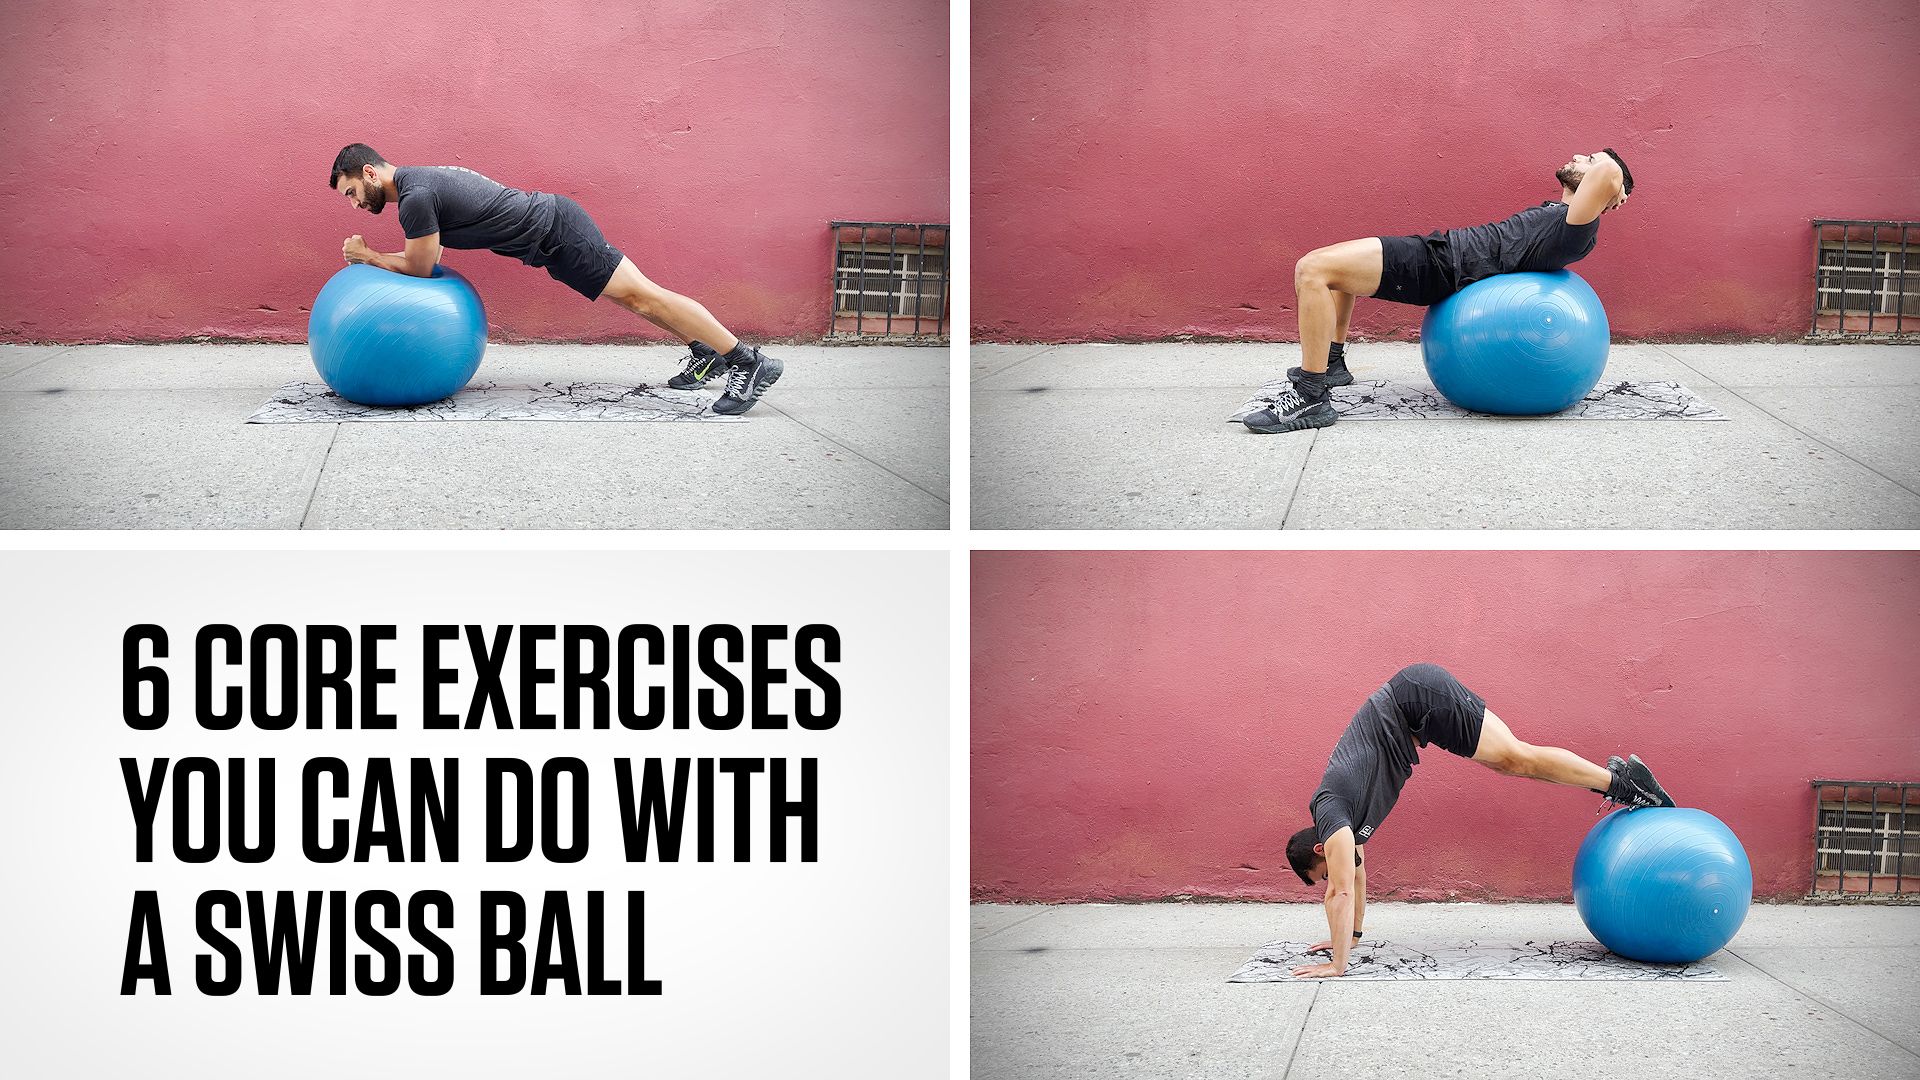 8 Exercises You Can Do With a Swiss Ball